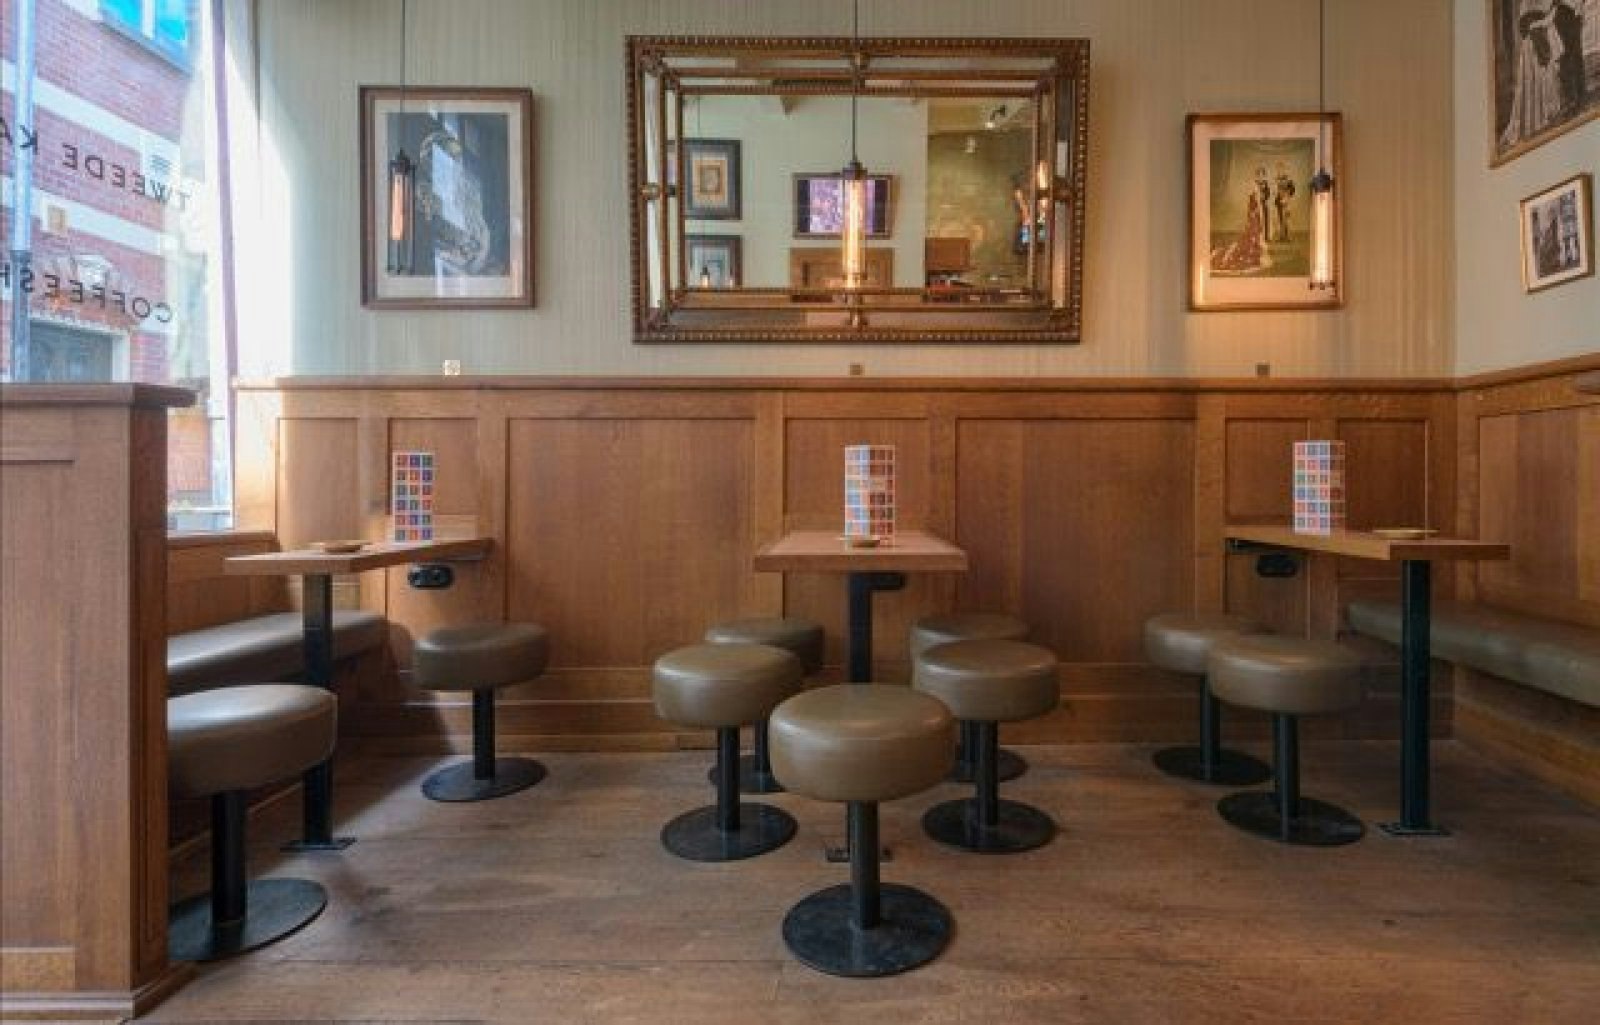 The interior of Tweede Kamer coffeeshop, Amsterdam. The walls are hung with a large ornate mirror as well as images of royals. There are three wooden tables with stools and couches around them. 